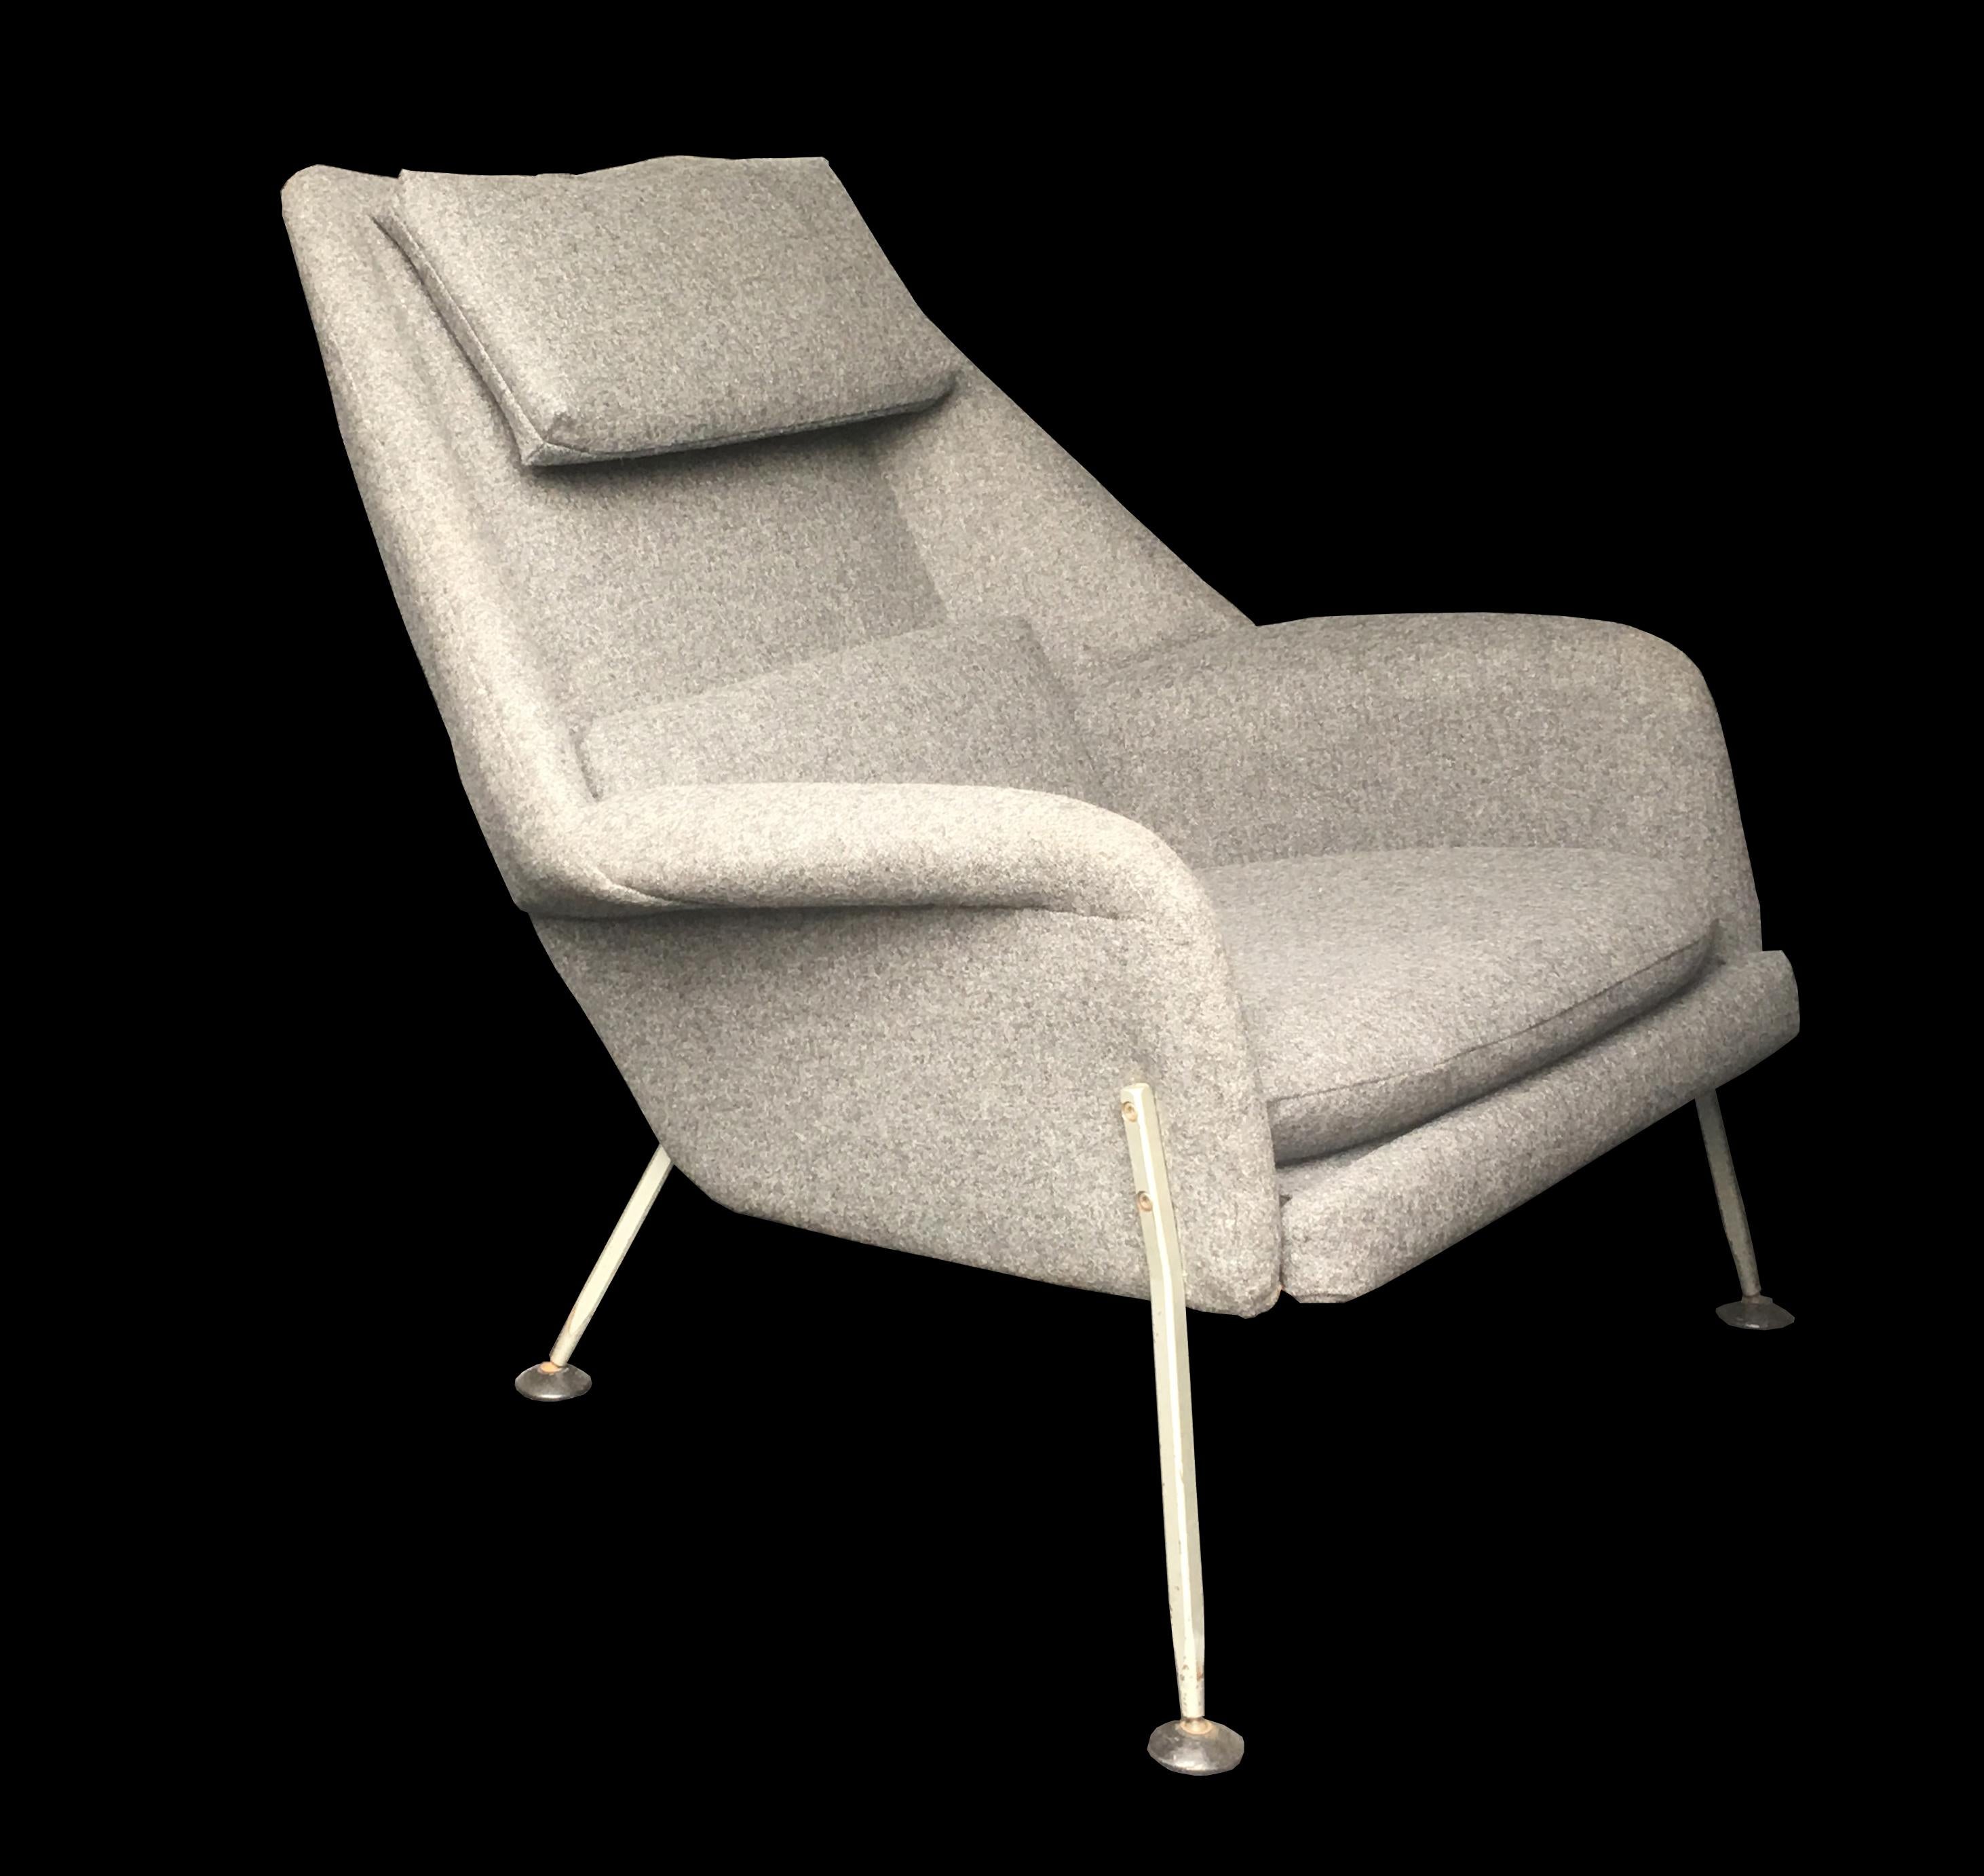 A very good early example of British midcentury design, designed and manufactured in the mid-1960s, which, other than reupholstery in grey wool so that it now complies with current fire regulations, is totally original.